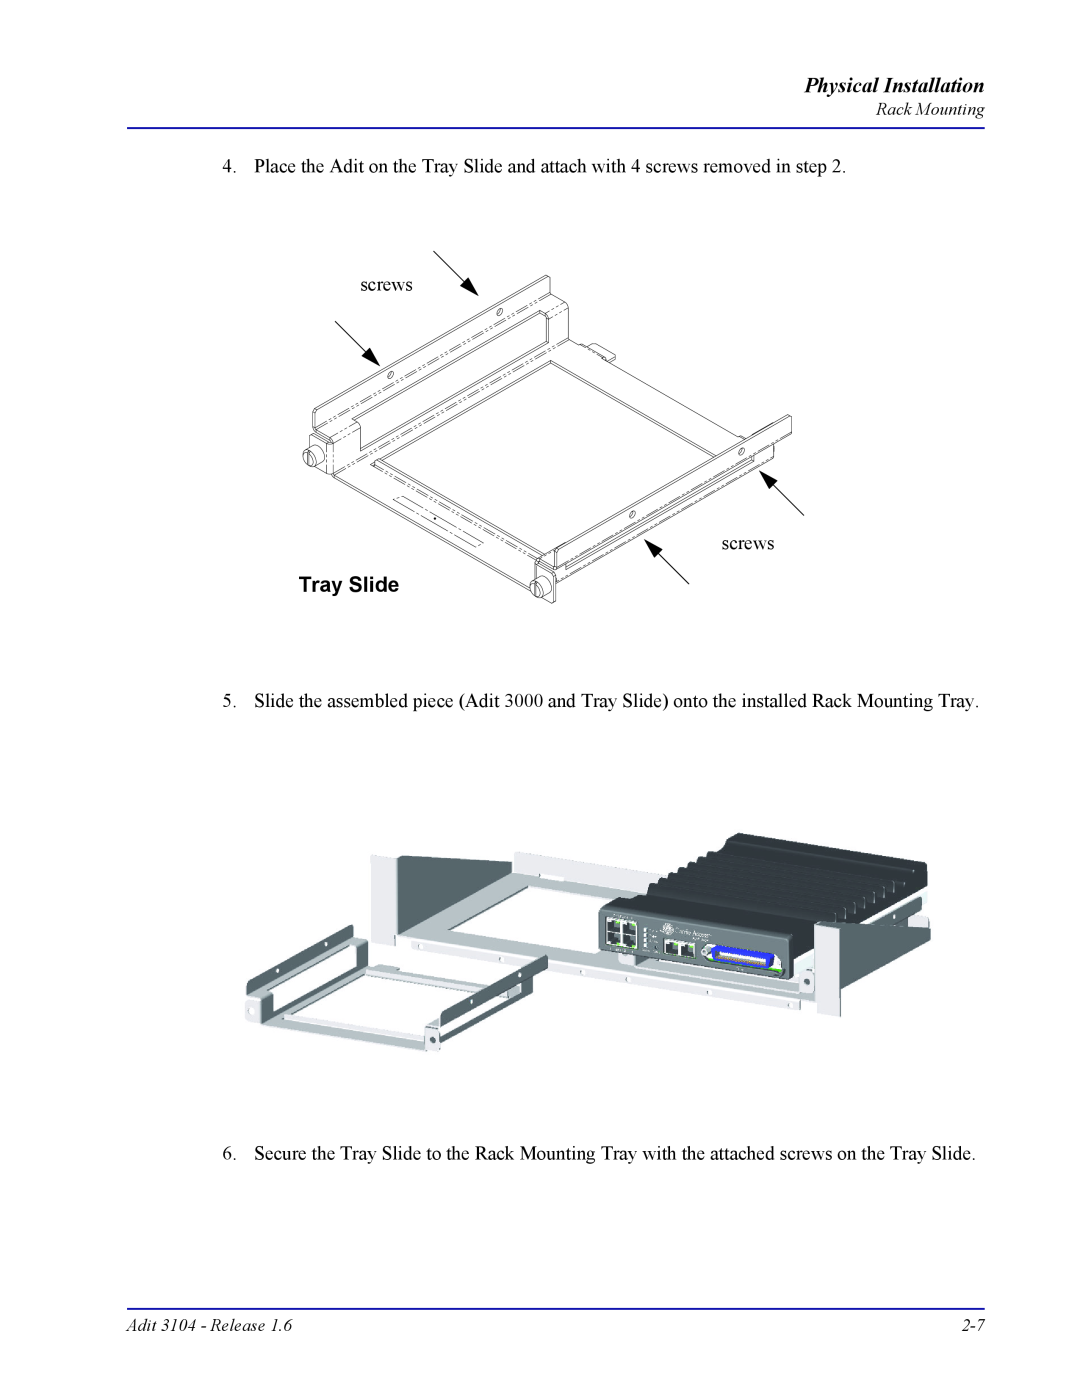 Carrier Access Adit 3104 user manual Tray Slide, Physical Installation 